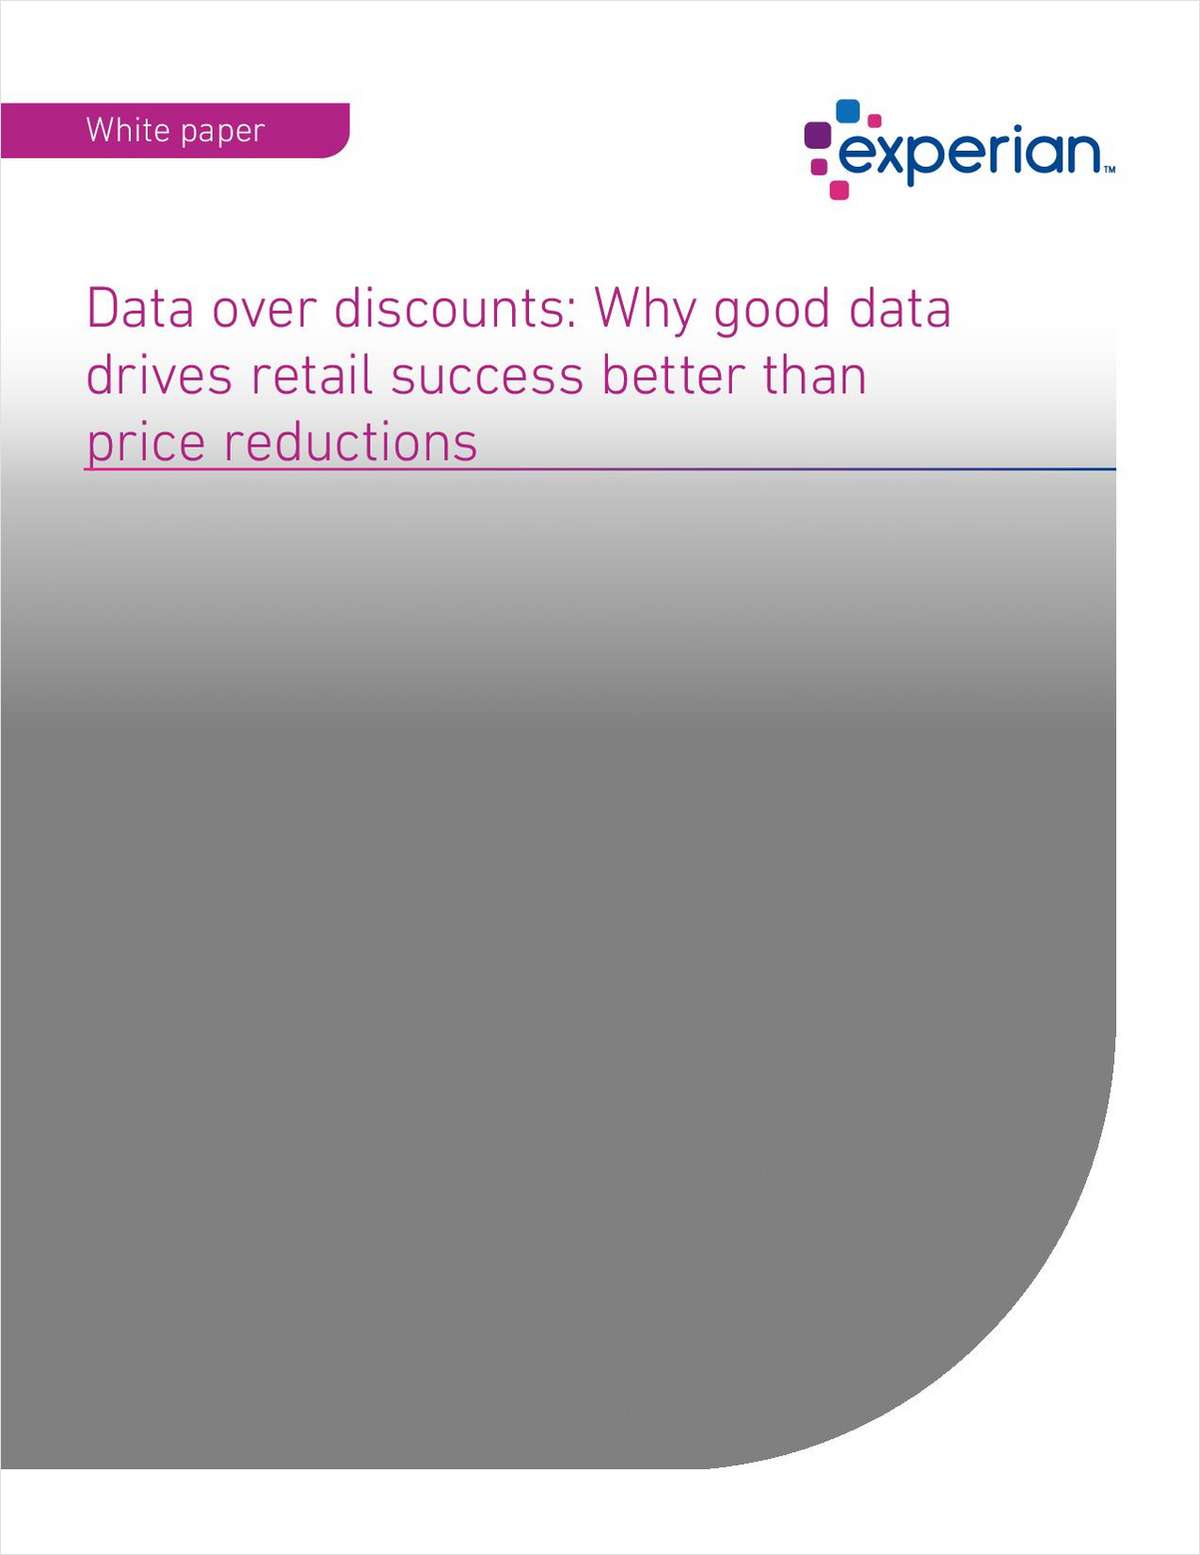 Data over discounts: Why good data drives retail success better than price reductions